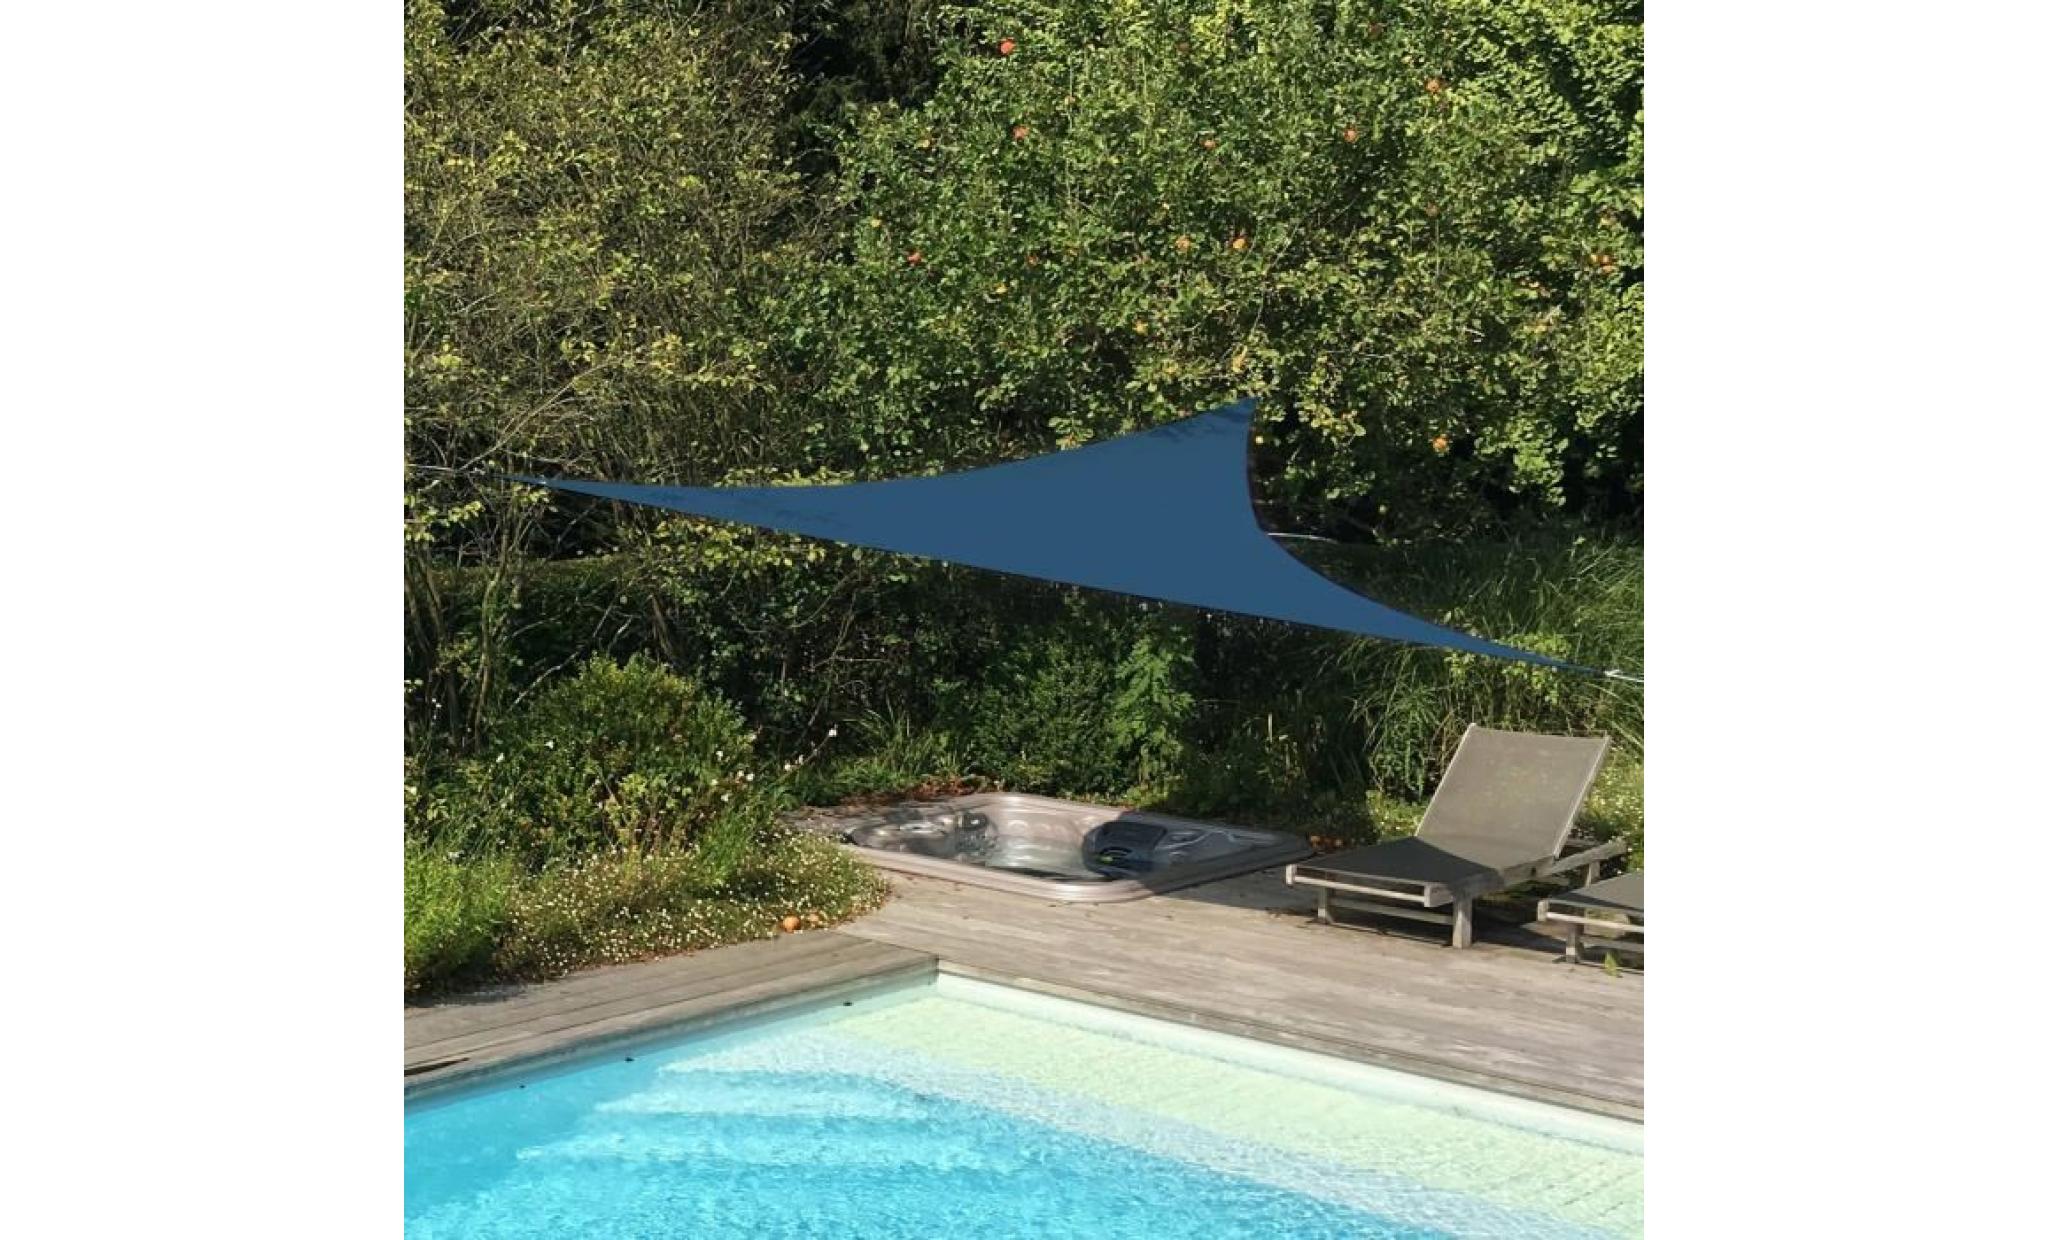 voile d’ombrage triangulaire extensible easywind 3,6 x 3,6 x 3,6m   bleu   anti uv upf 50+ pas cher